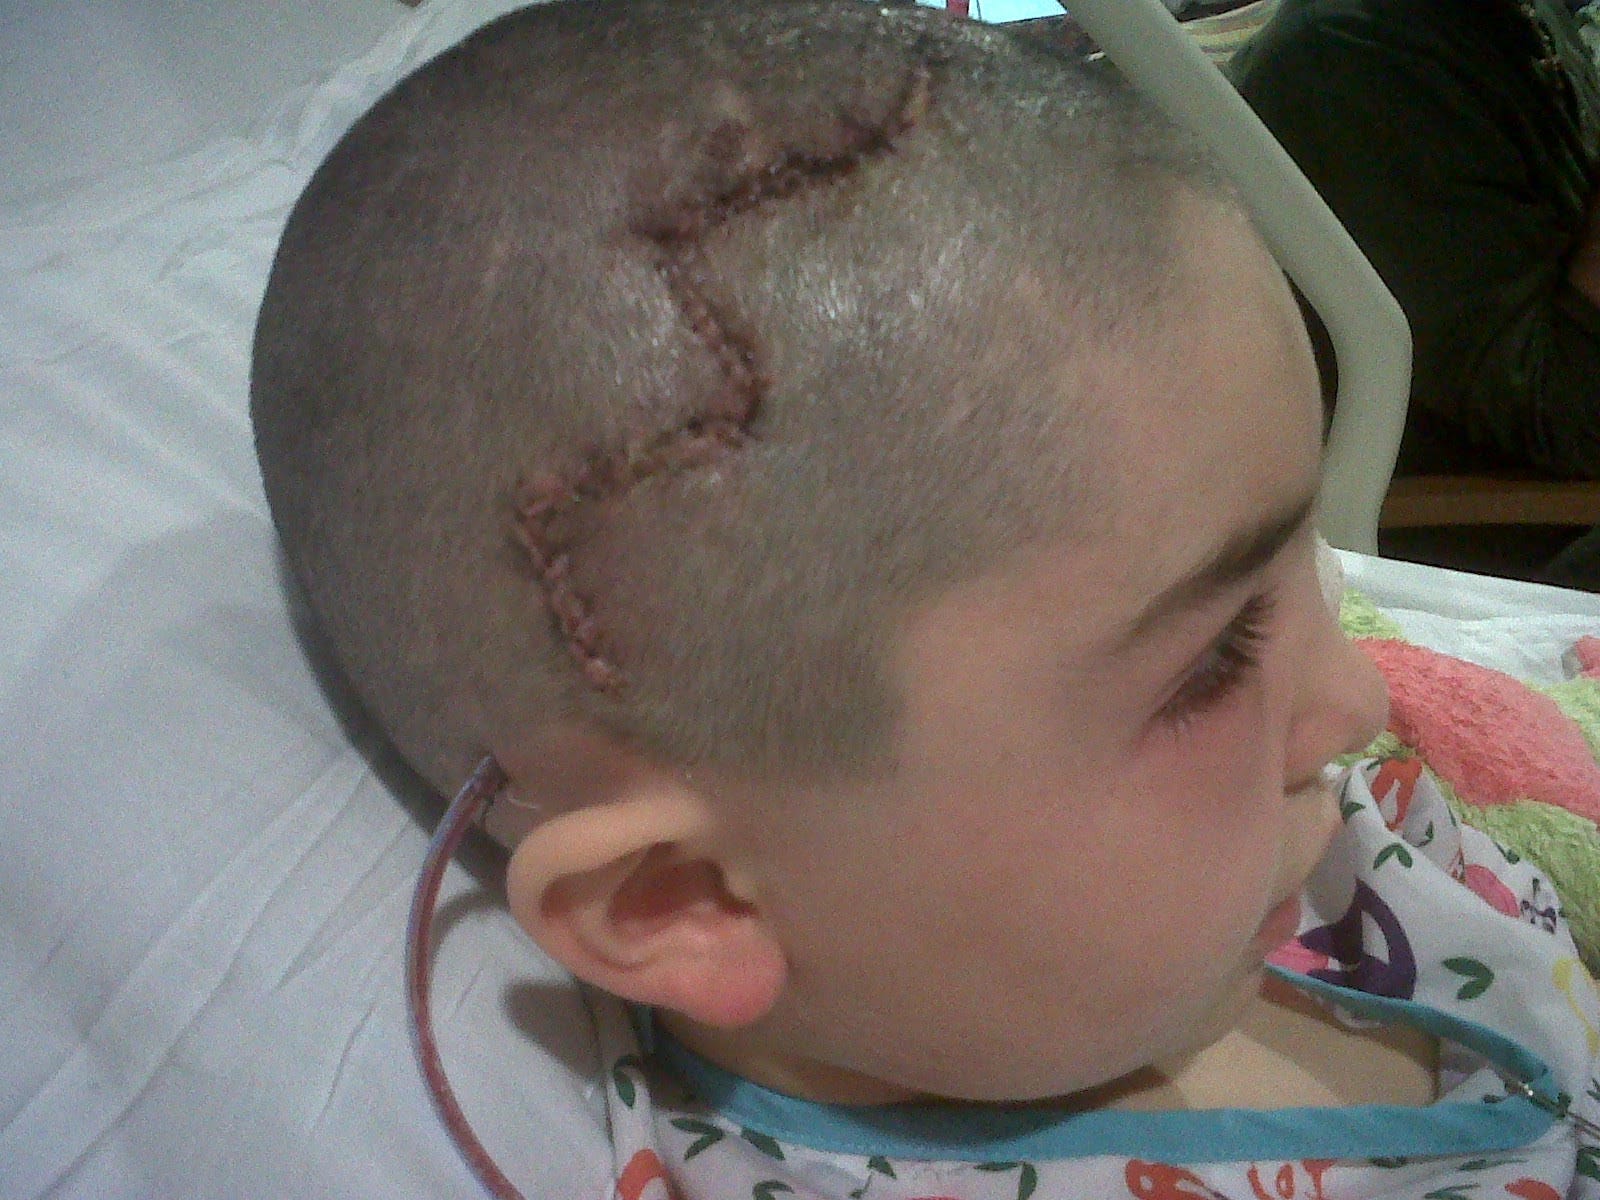 Doctors performed life-saving surgery to remove an AVM in Antonio Dinello's brain in 2011. (Courtesy of the Dinello family)